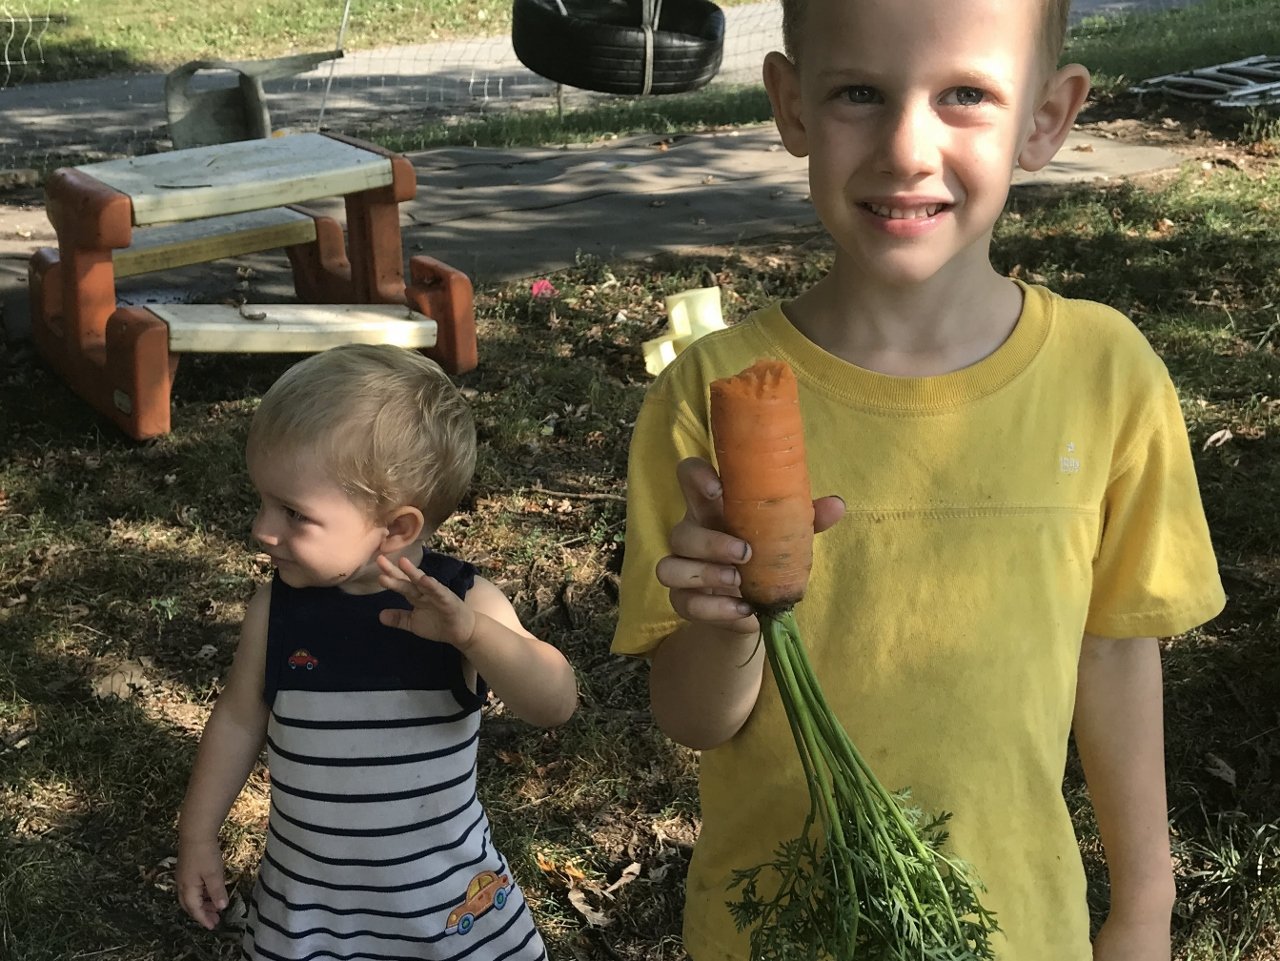 Previous Happening: Carrots Finally!